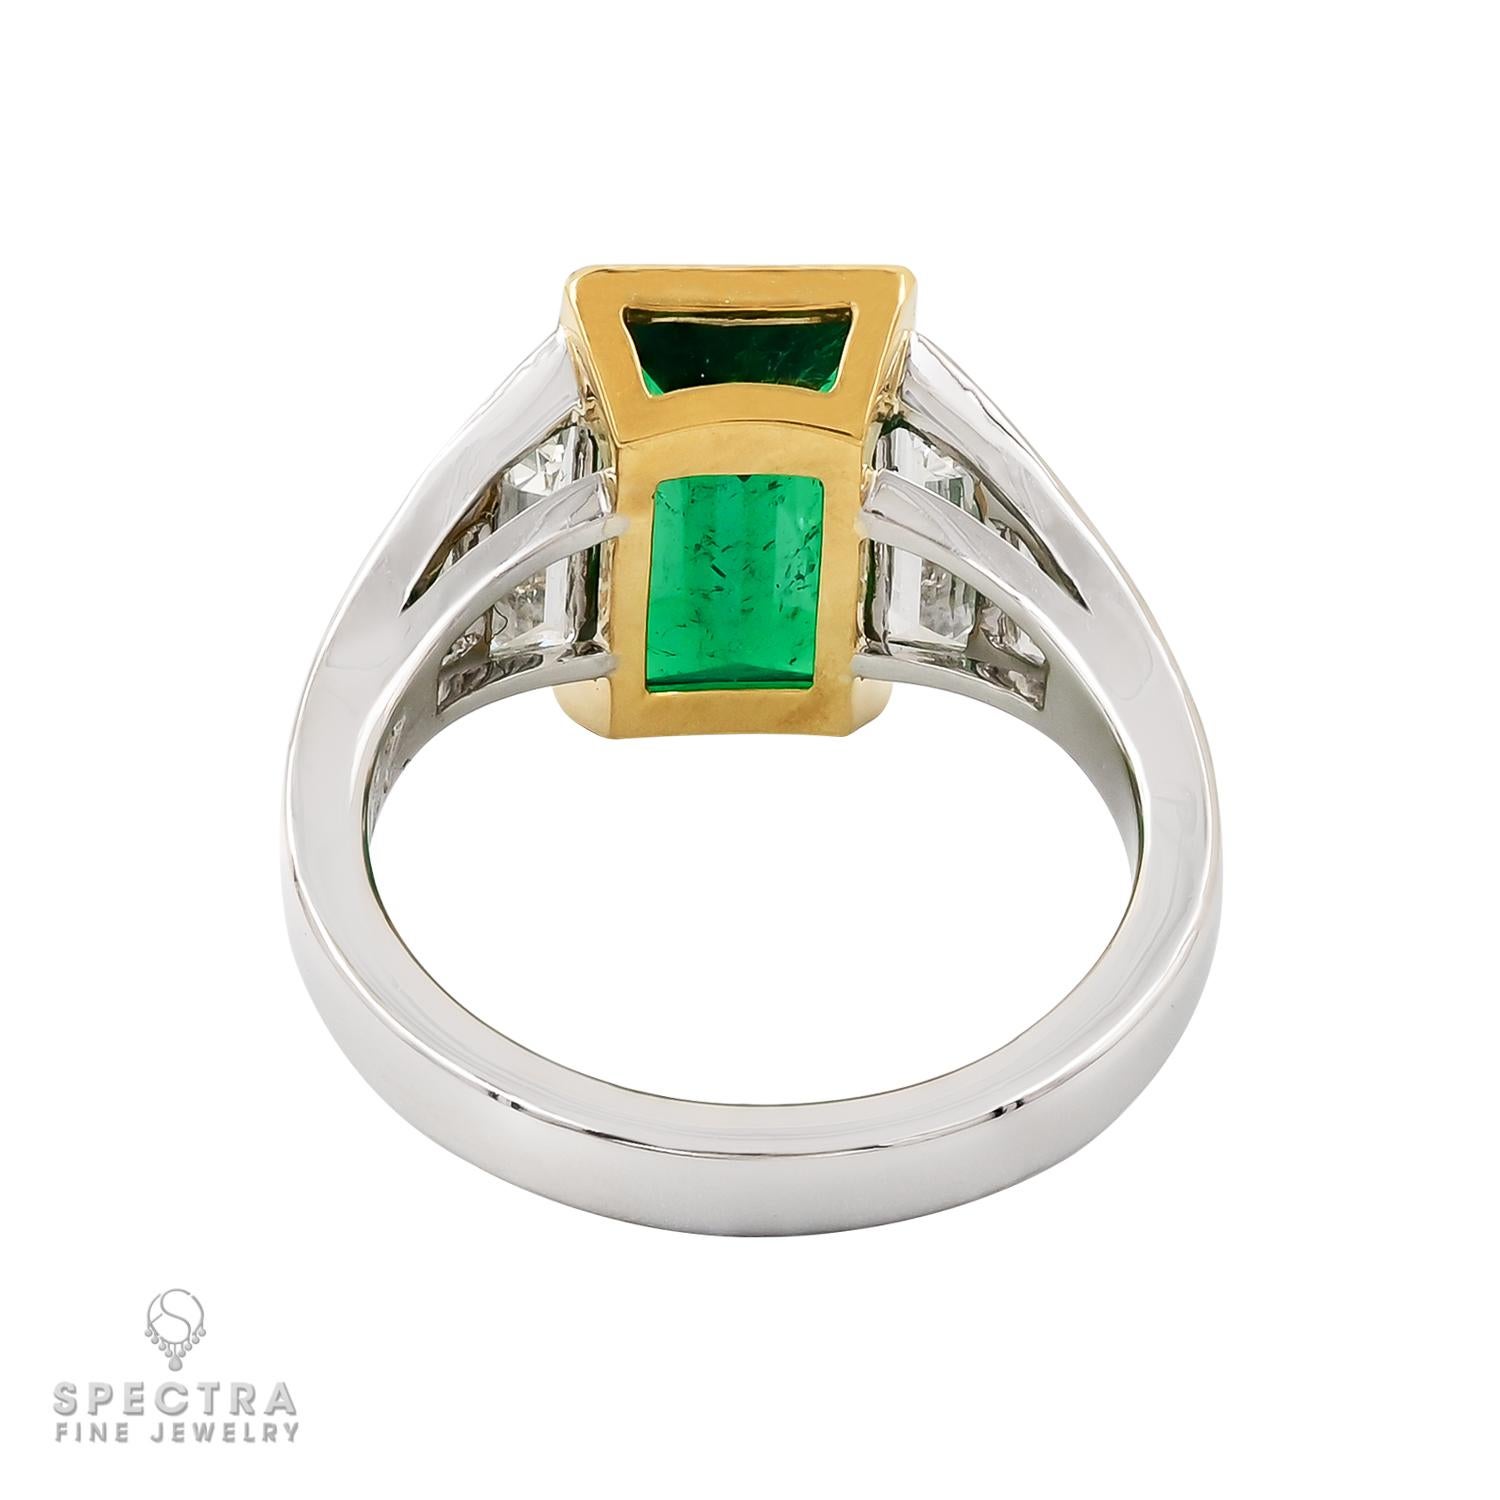 Contemporary Spectra Fine Jewelry AGL Certified 2.43 Carat Colombian Emerald Diamond Ring For Sale